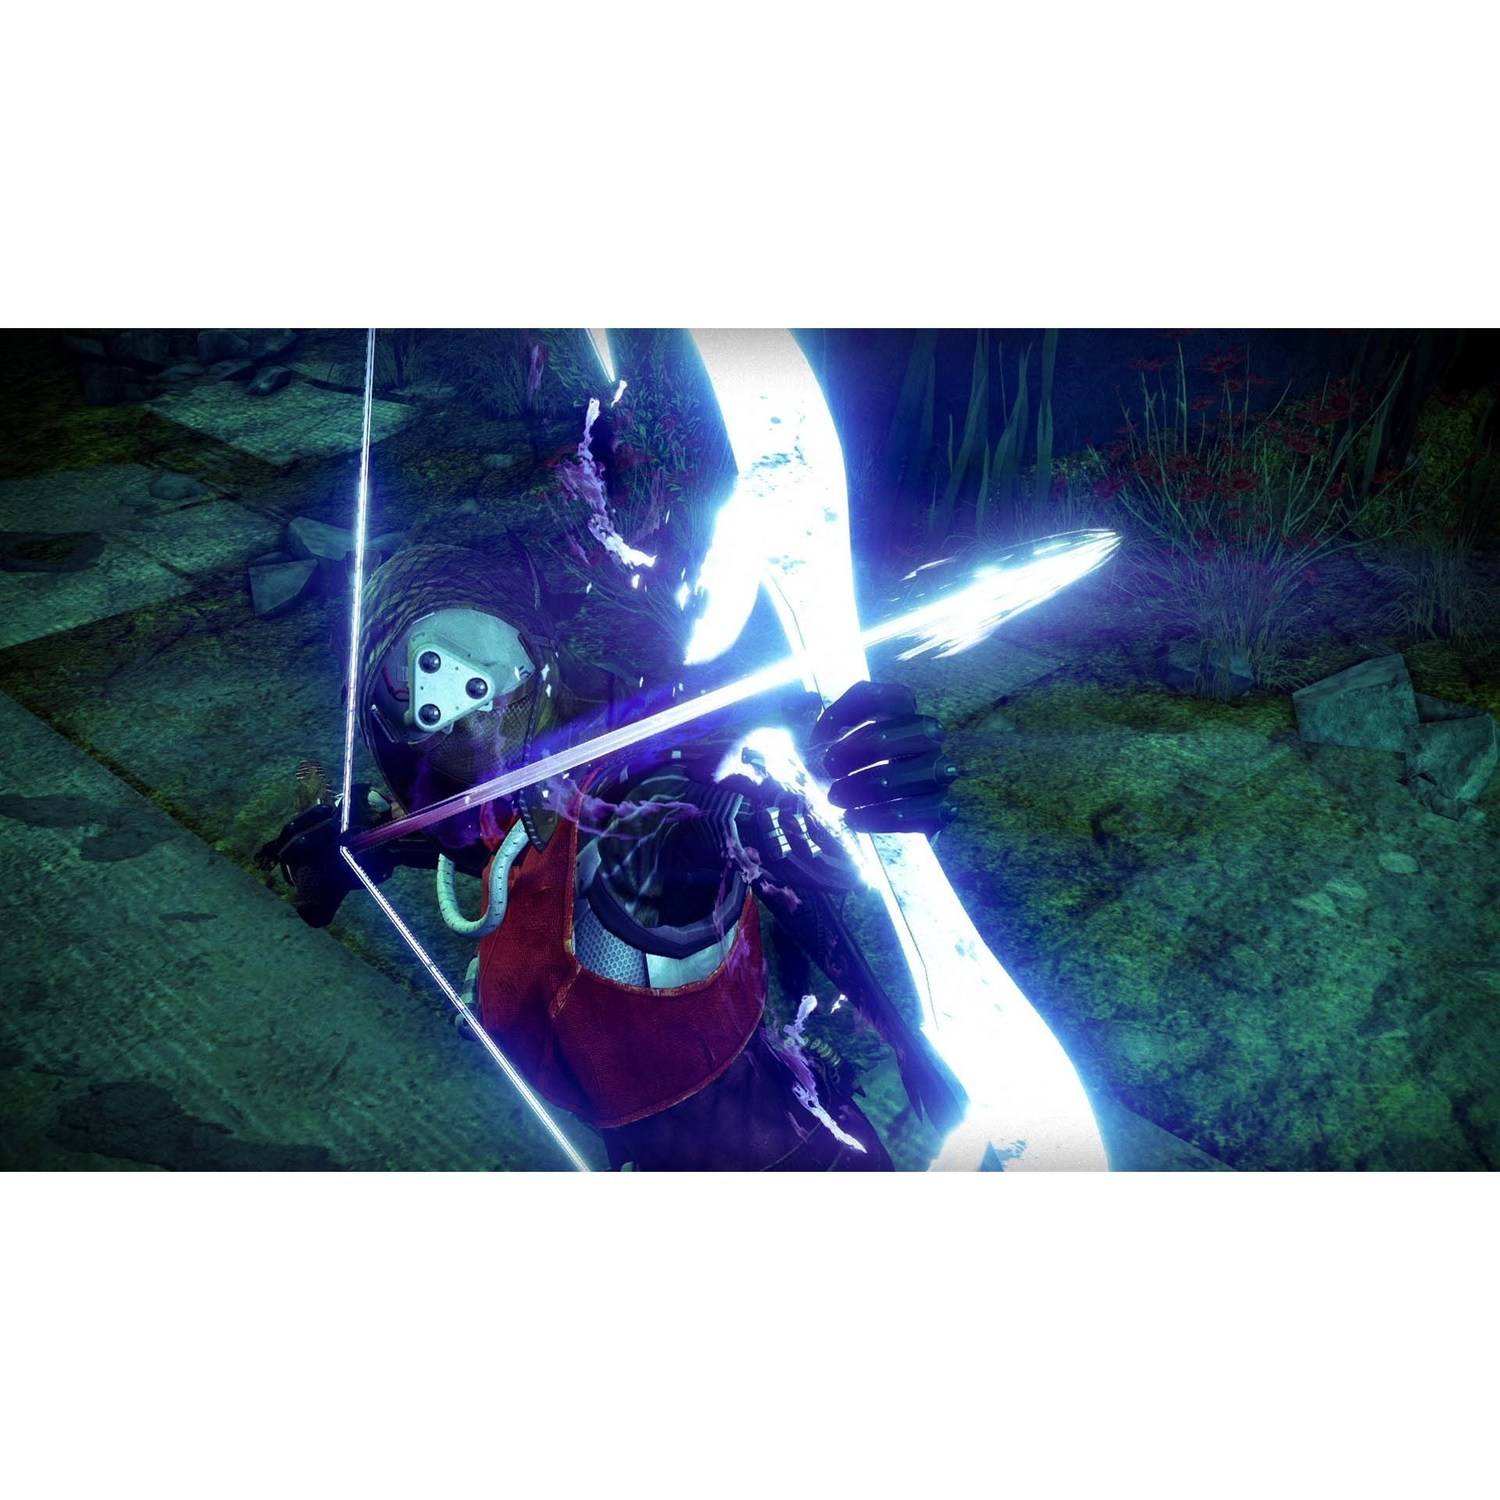 Destiny: The Taken King Legendary Edition, Activision, PlayStation 4, 047875874428 - image 9 of 31